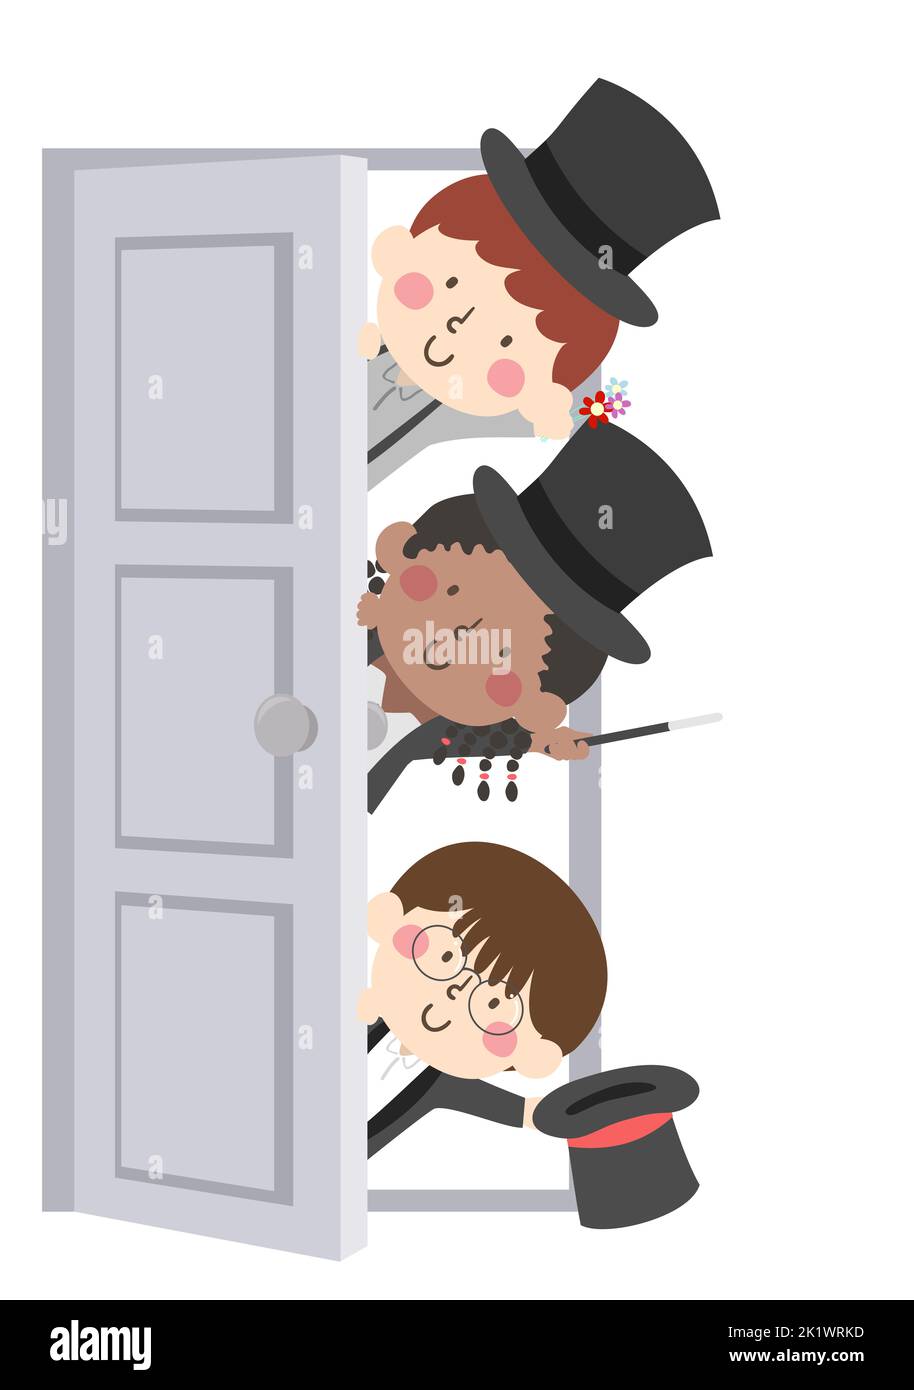 Illustration of Kids Wearing Magician Hats and Uniform Opening the Door Stock Photo